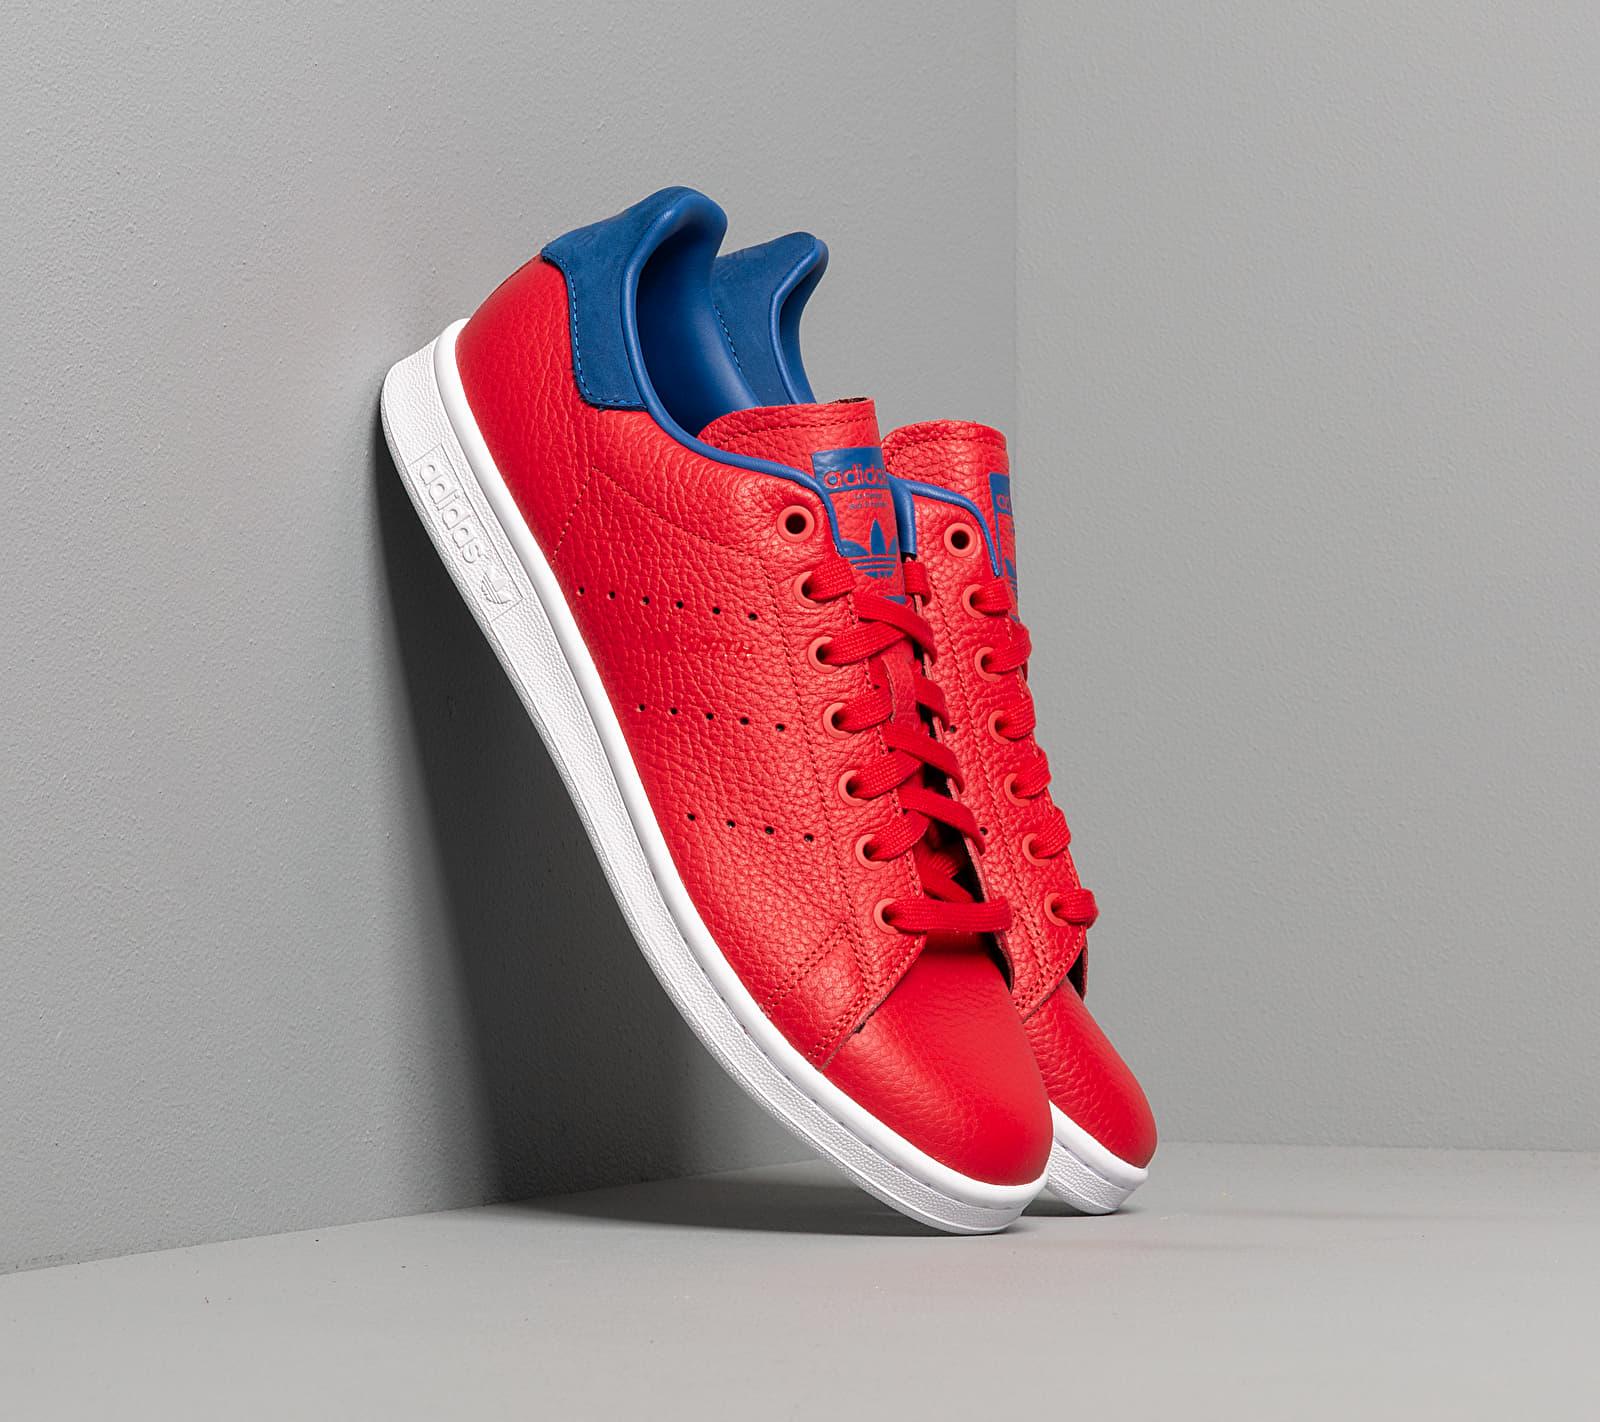 Buy > adidas stan smith scarlet > in stock